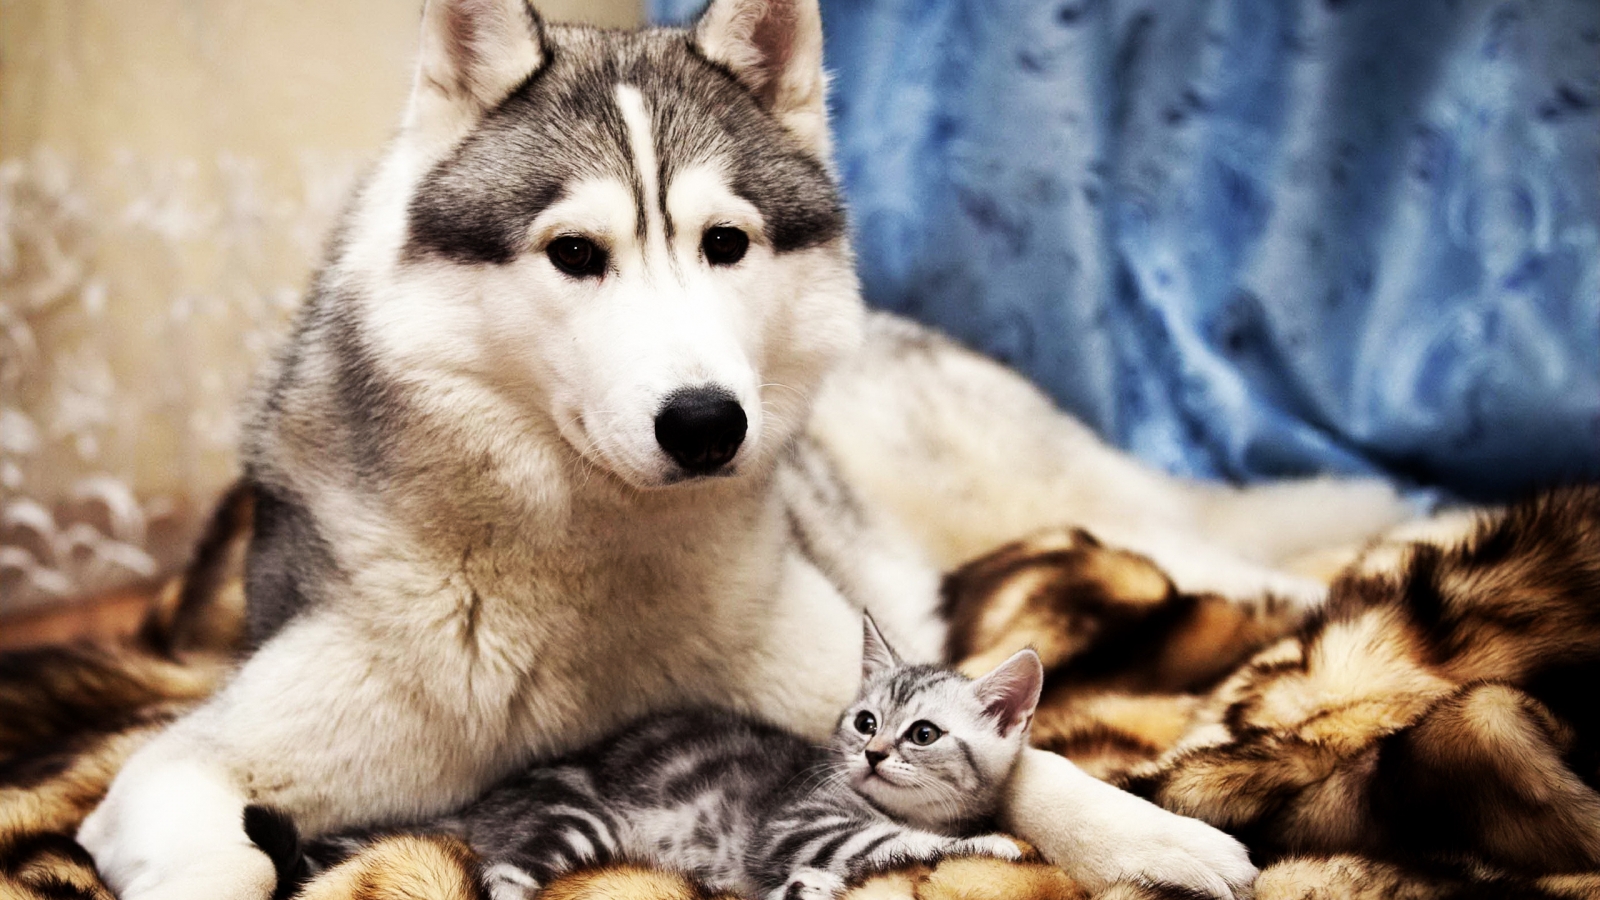 Dog and Cat Friends for 1600 x 900 HDTV resolution